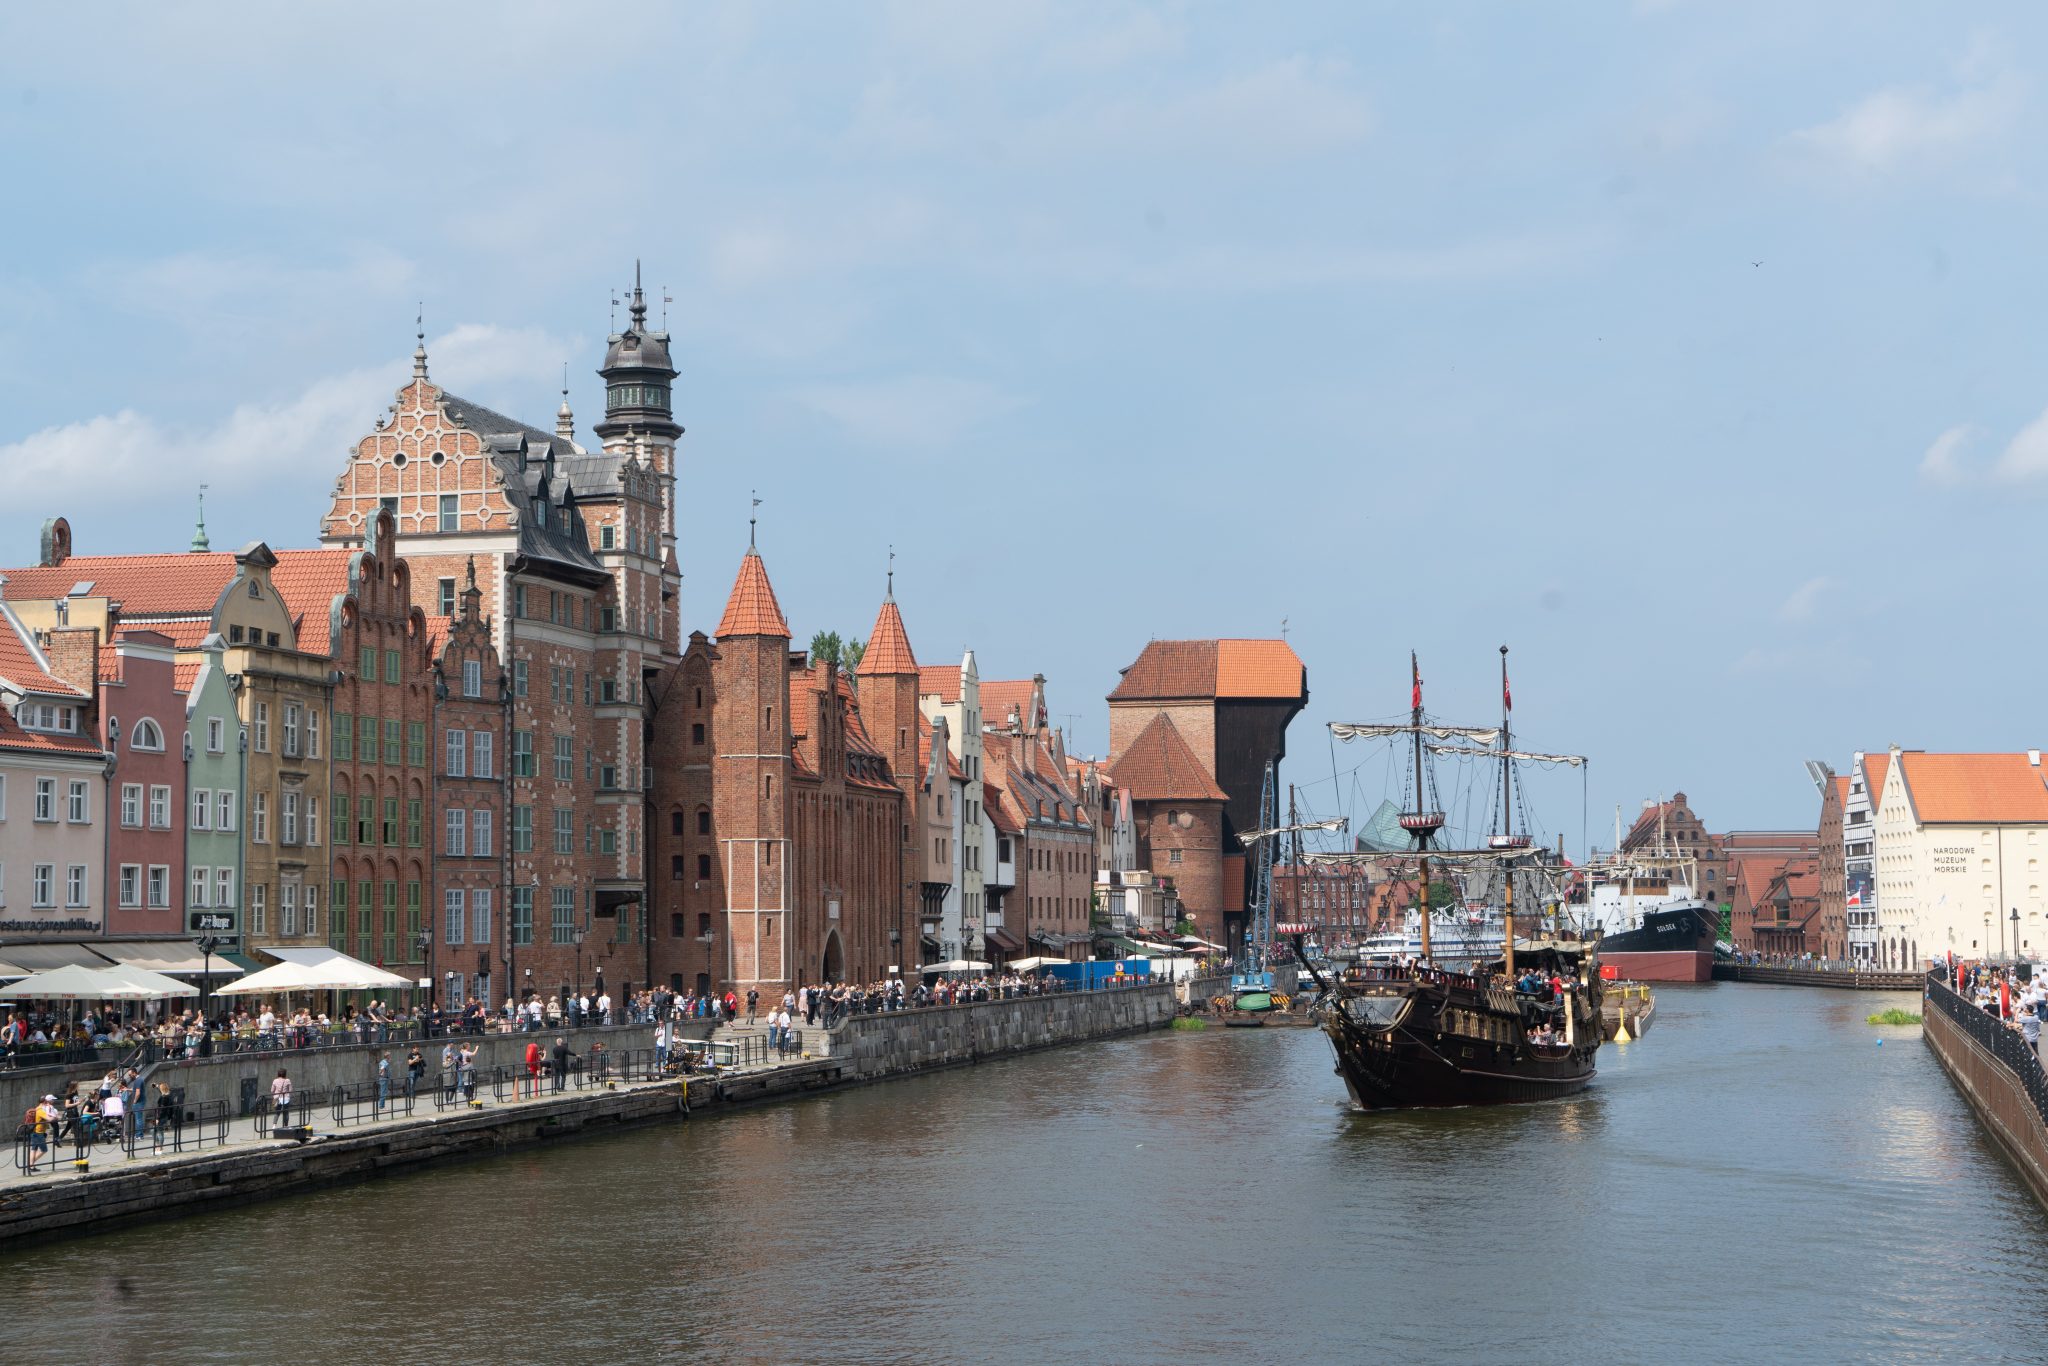 Back in Poland to visit Tri-city: Gdańsk, Gdynia and Sopot 1